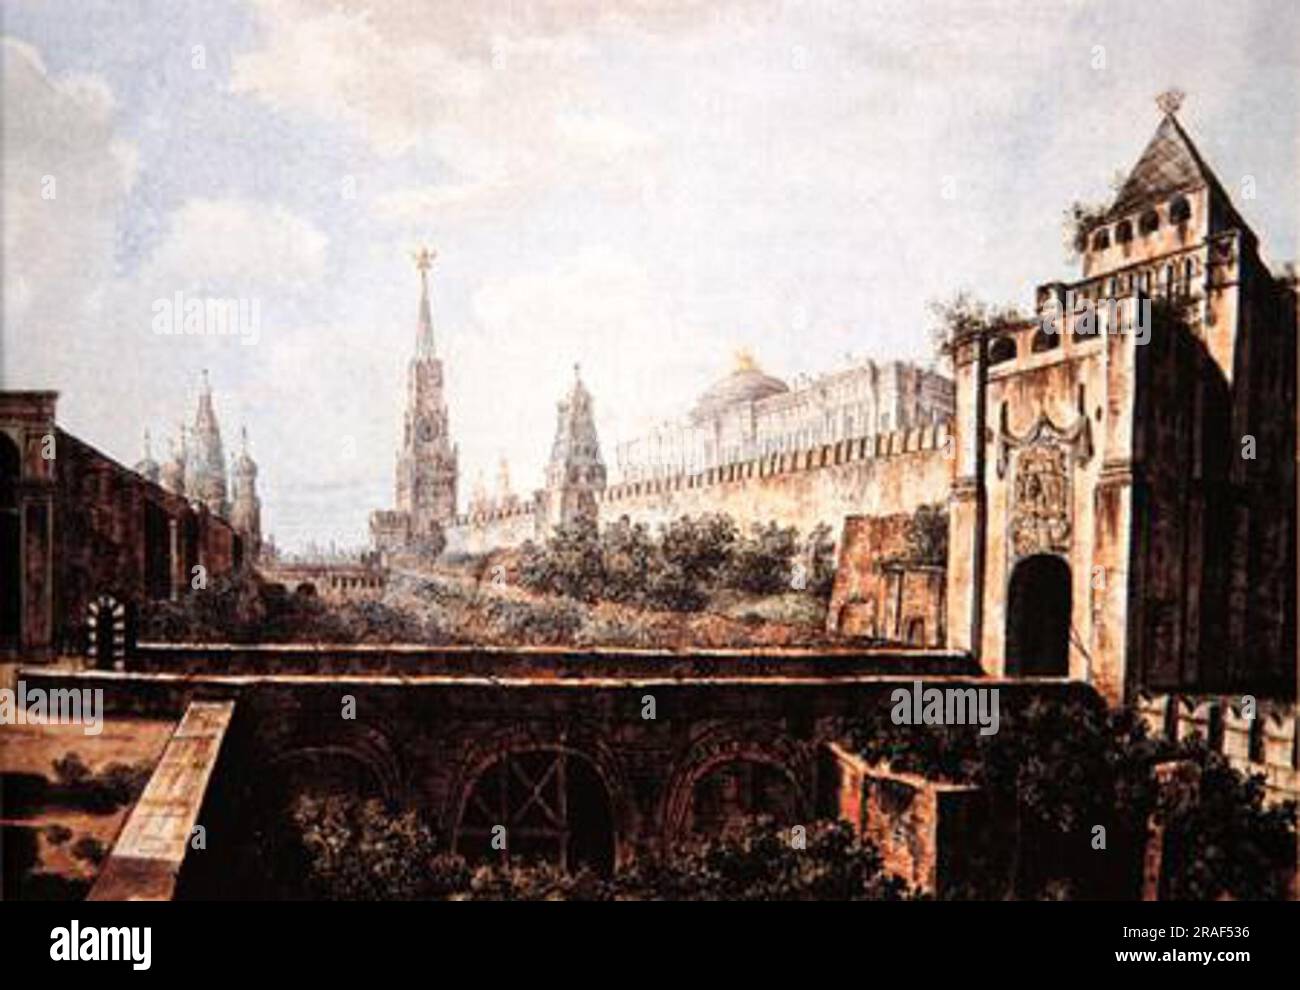 Red Square in Moscow. Date/Period: 1801. Painting. Oil on canvas. Height:  81.3 cm (32 in); Width: 110.5 cm (43.5 in). Author: Fyodor Alekseyev.  FYODOR YAKOVLEVICH ALEKSEYEV. Alexeyev, Fyodor Yakovlevich Stock Photo -  Alamy